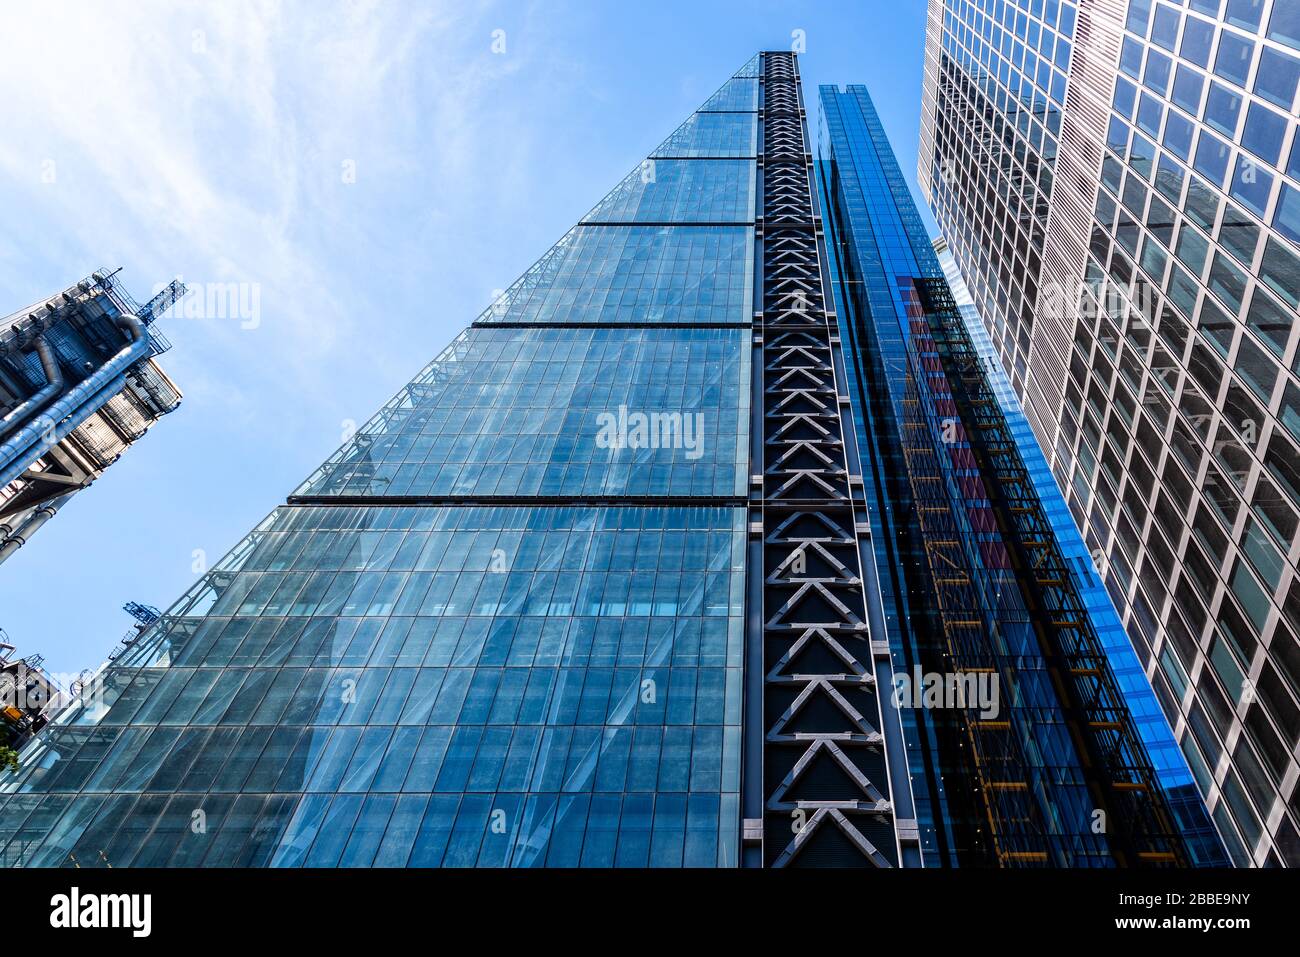 London, UK - May 14, 2019: Low angle view of Leadenhall Building in the City of London against blue sky. Stock Photo